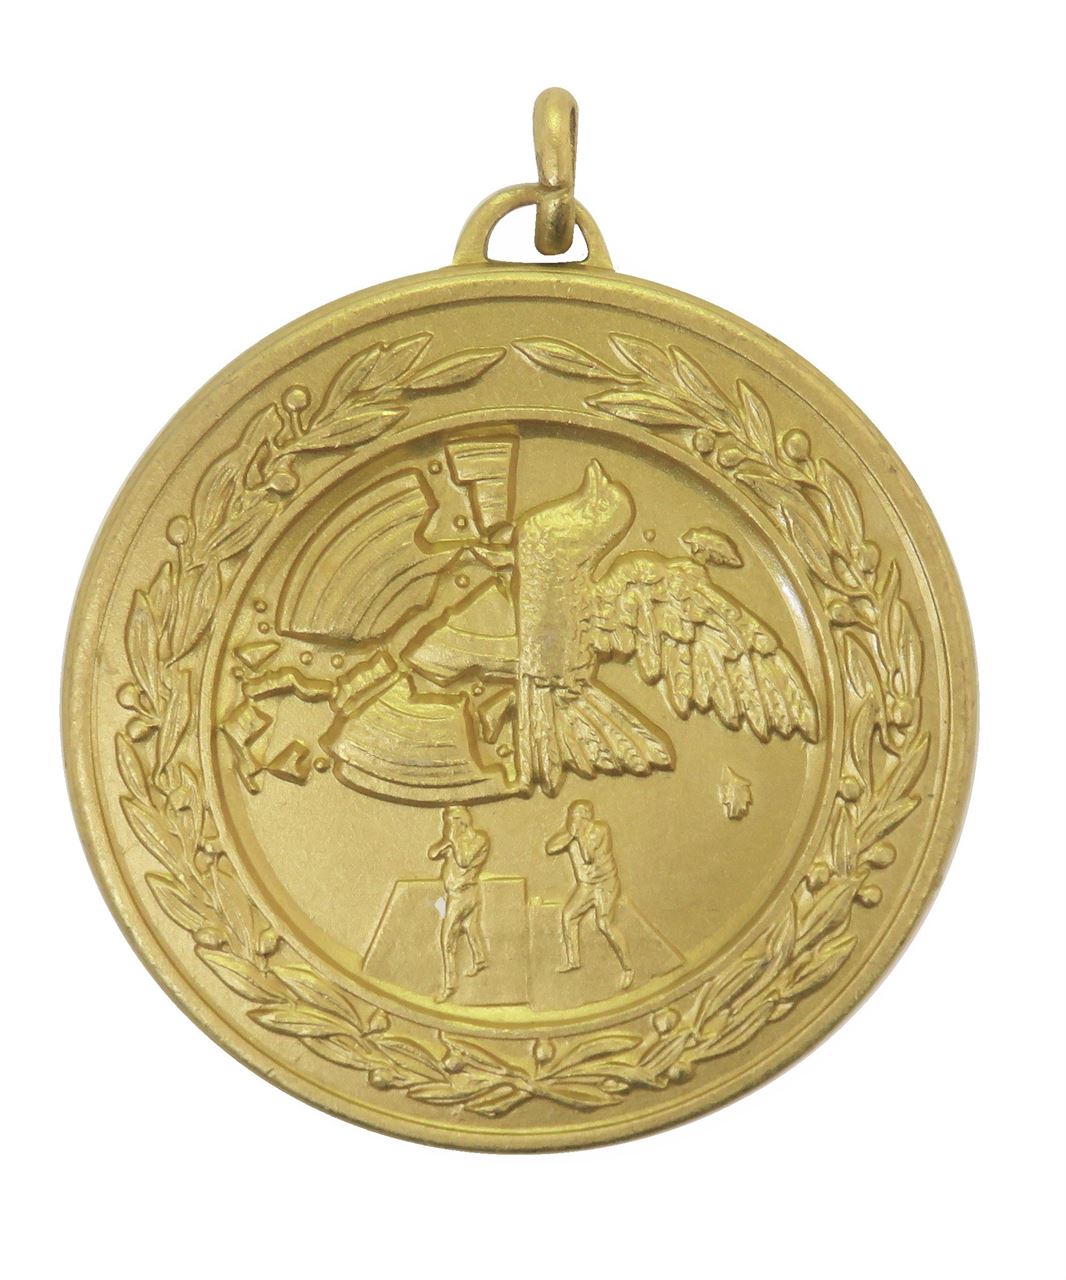 Gold Laurel Economy Clay Pigeon Medal (size: 50mm) - 4190E